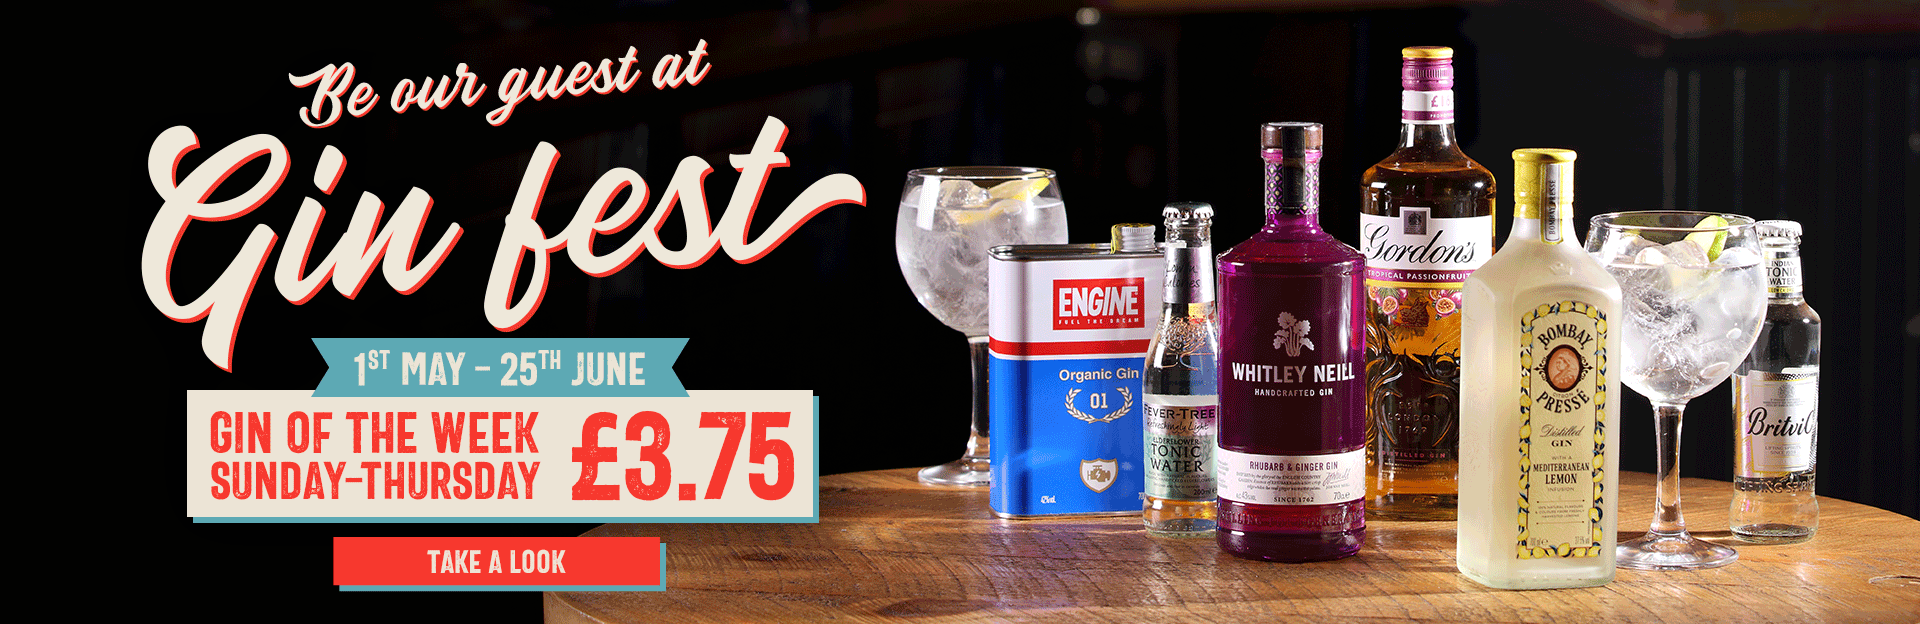 Gin Fest at O'Neill's Liverpool